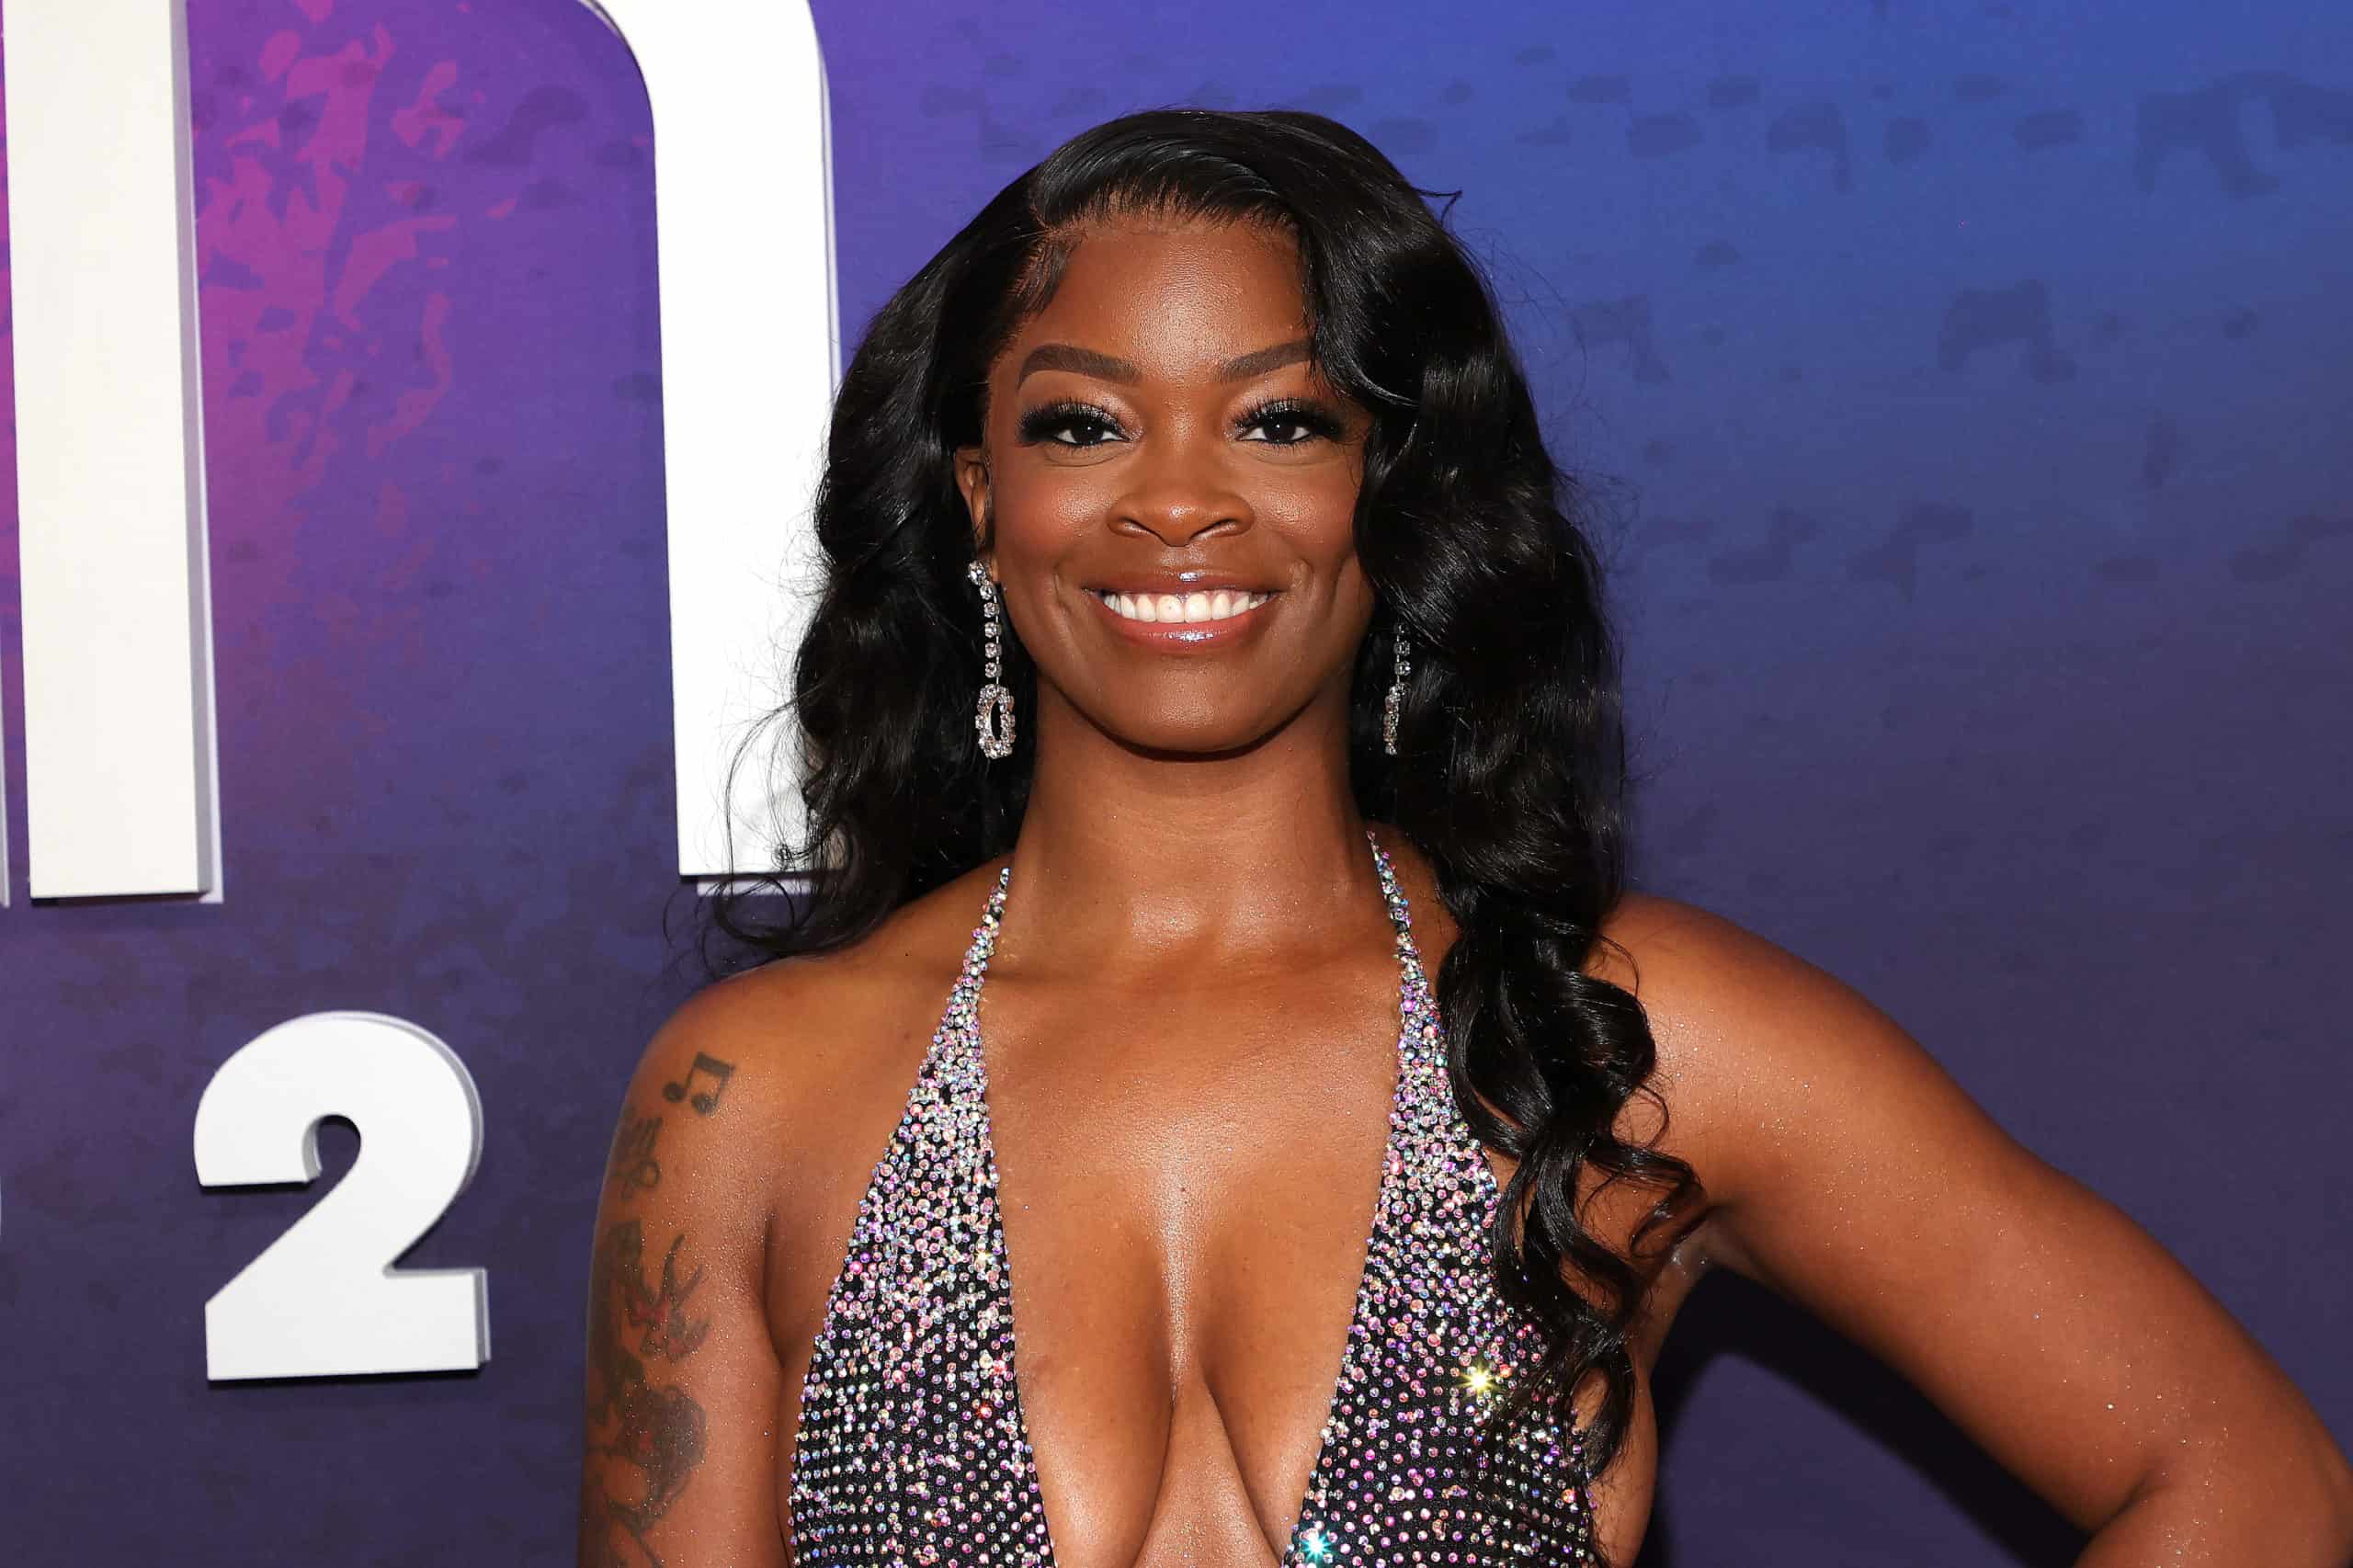 Ari Lennox Reflects On "Painful" Incident That Led To Her Arrest In Amsterdam